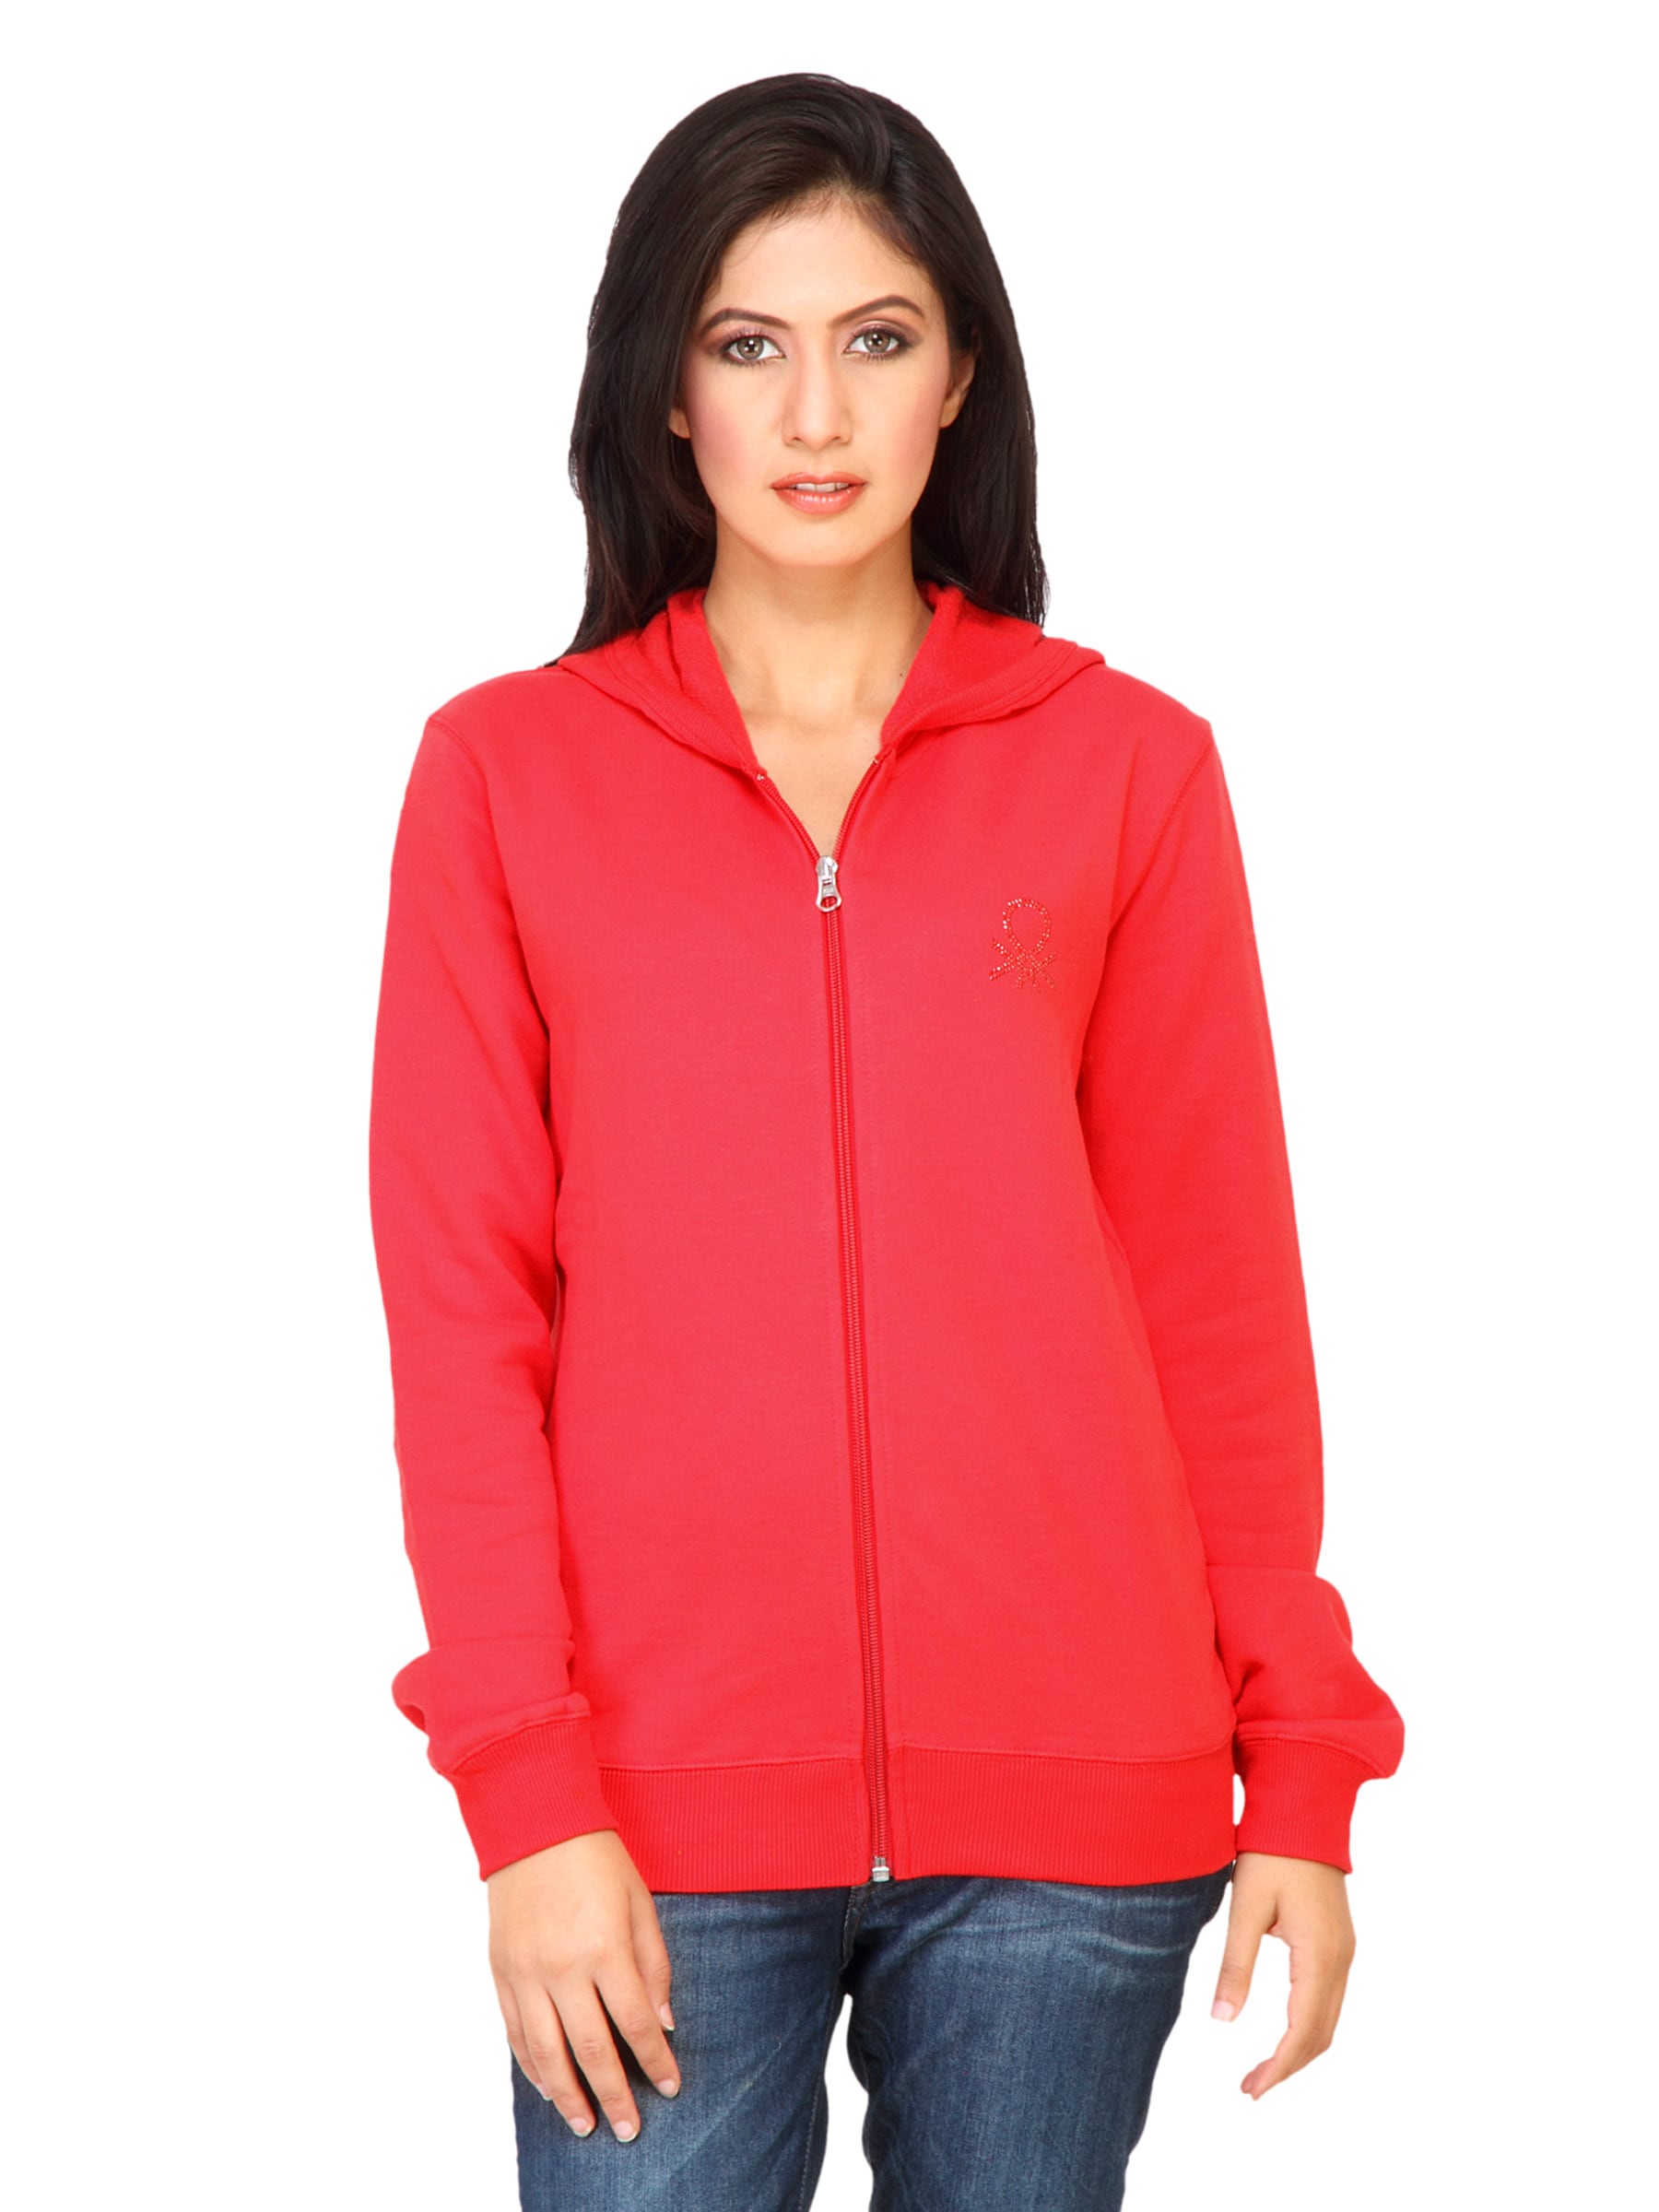 United Colors of Benetton Women Solid Red Sweat Shirts